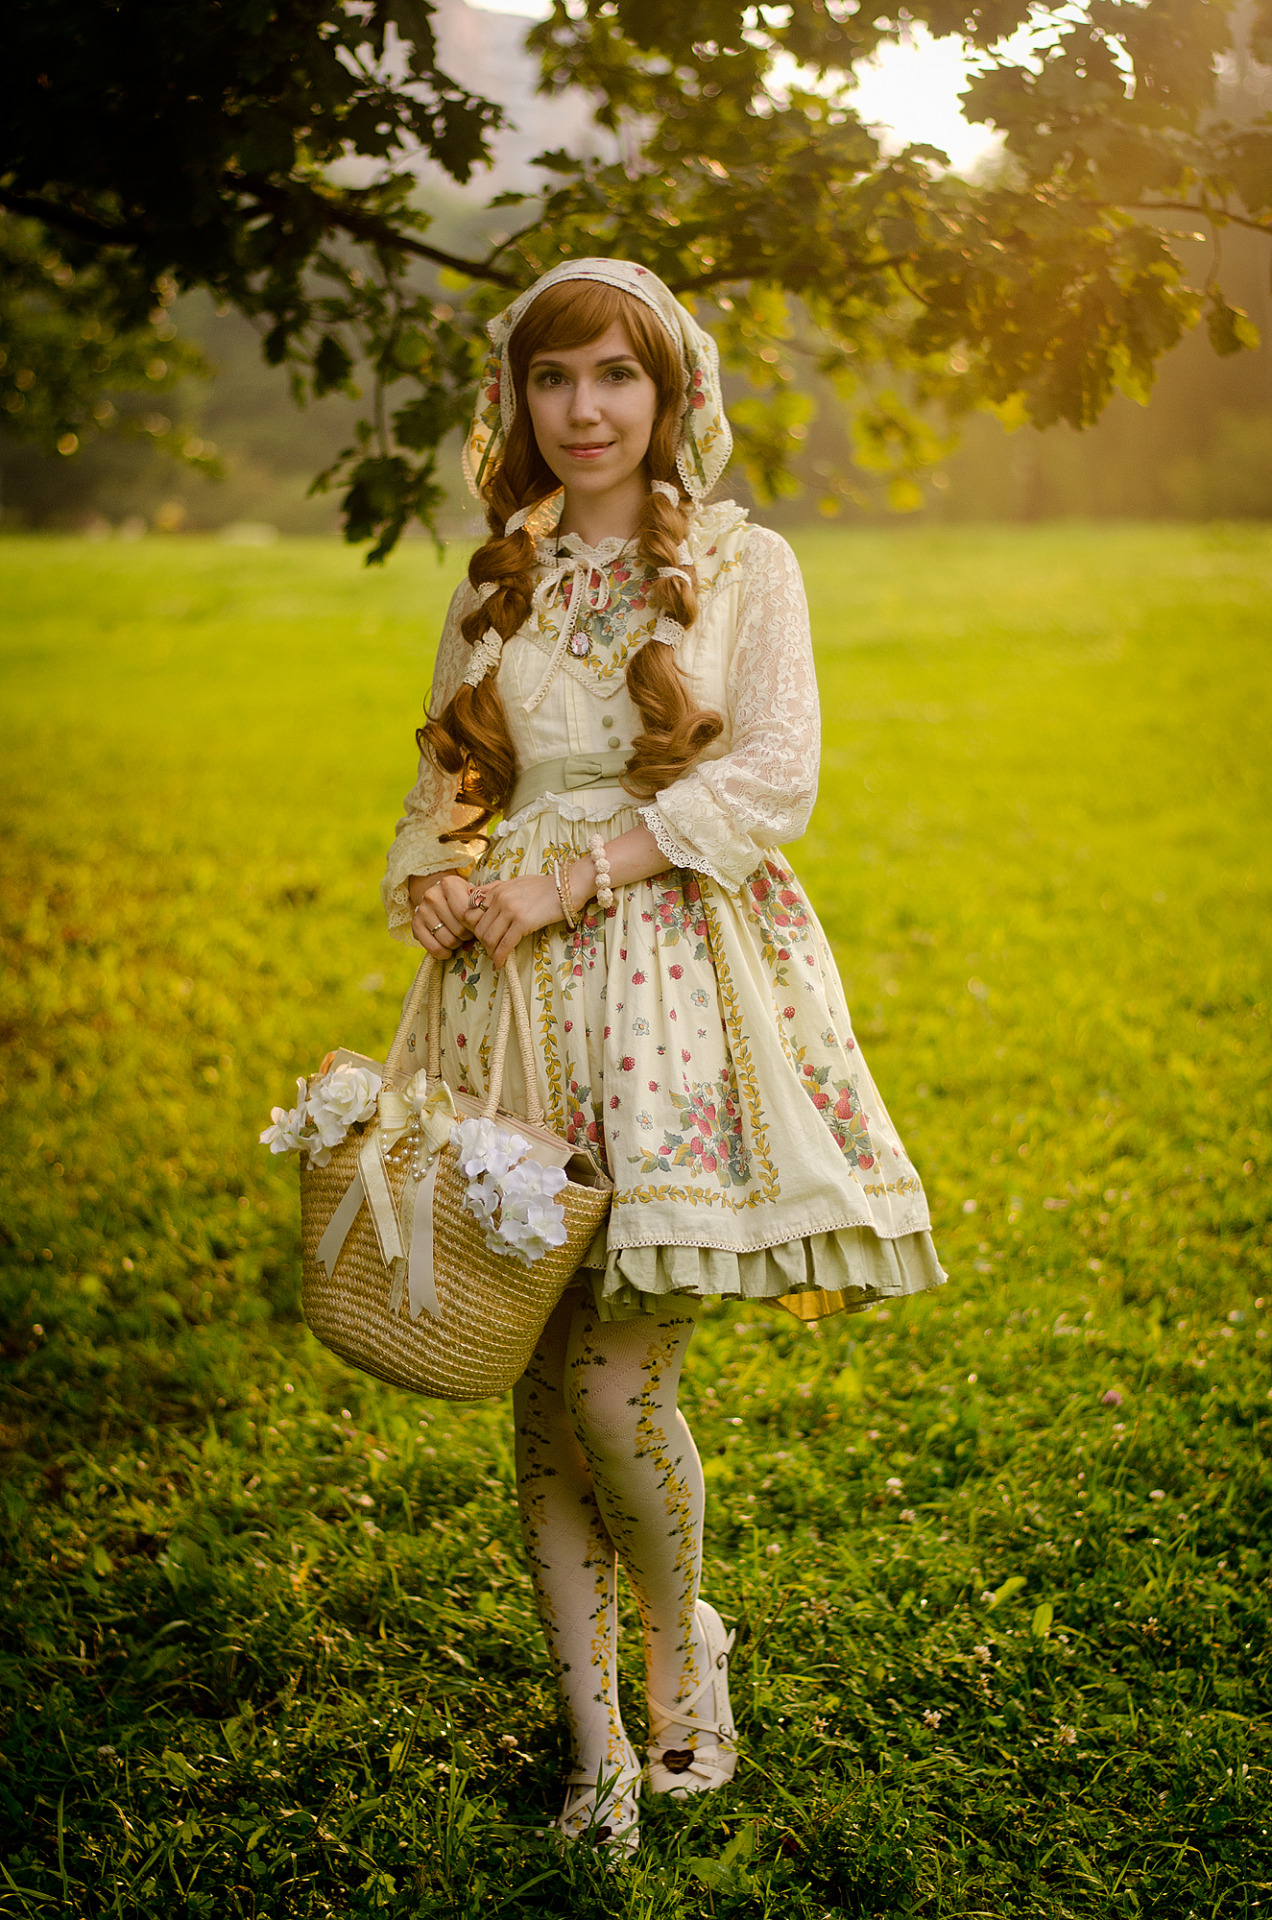 angie-dream: My oufit for a lolita picnic. - Russian lolitas